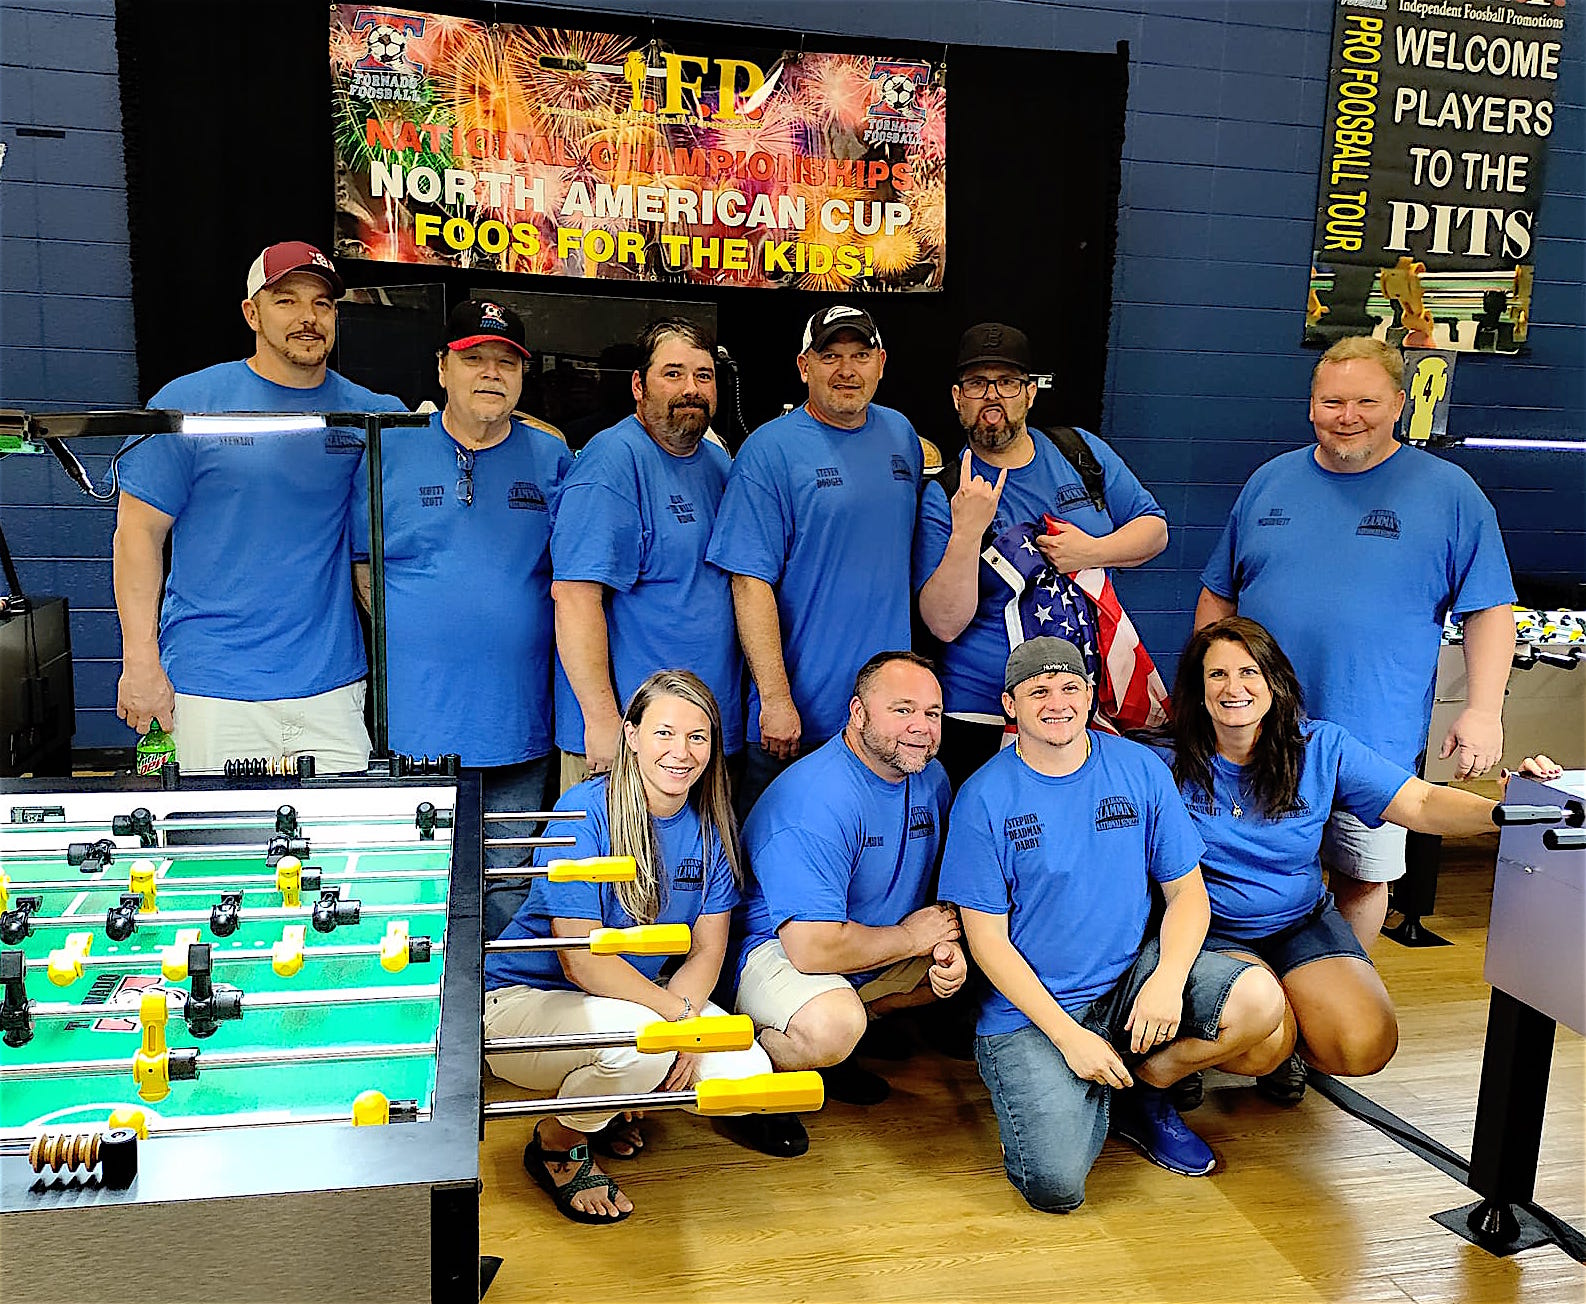 The group of Alabama foosball players representing the state in team competition at the 2022 North American Cup Championships.